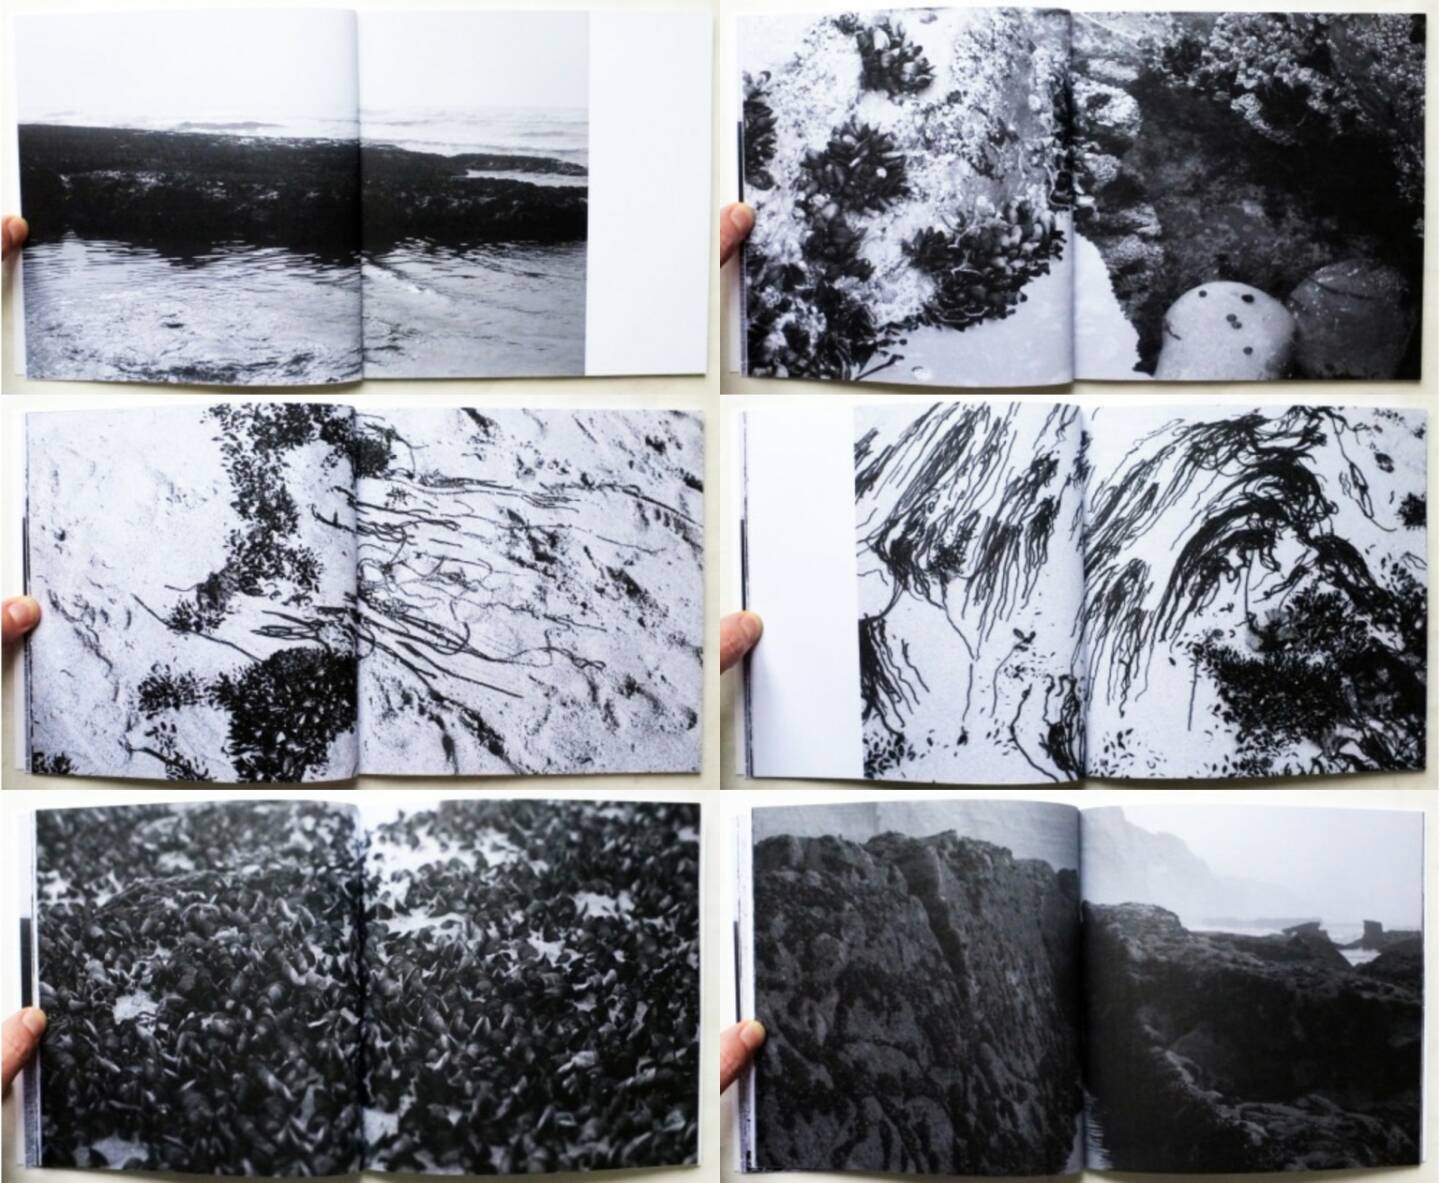 Pedro dos Reis - Sea Drawings, Self published 2015, Beispielseiten, sample spreads - http://josefchladek.com/book/pedro_dos_reis_-_sea_drawings